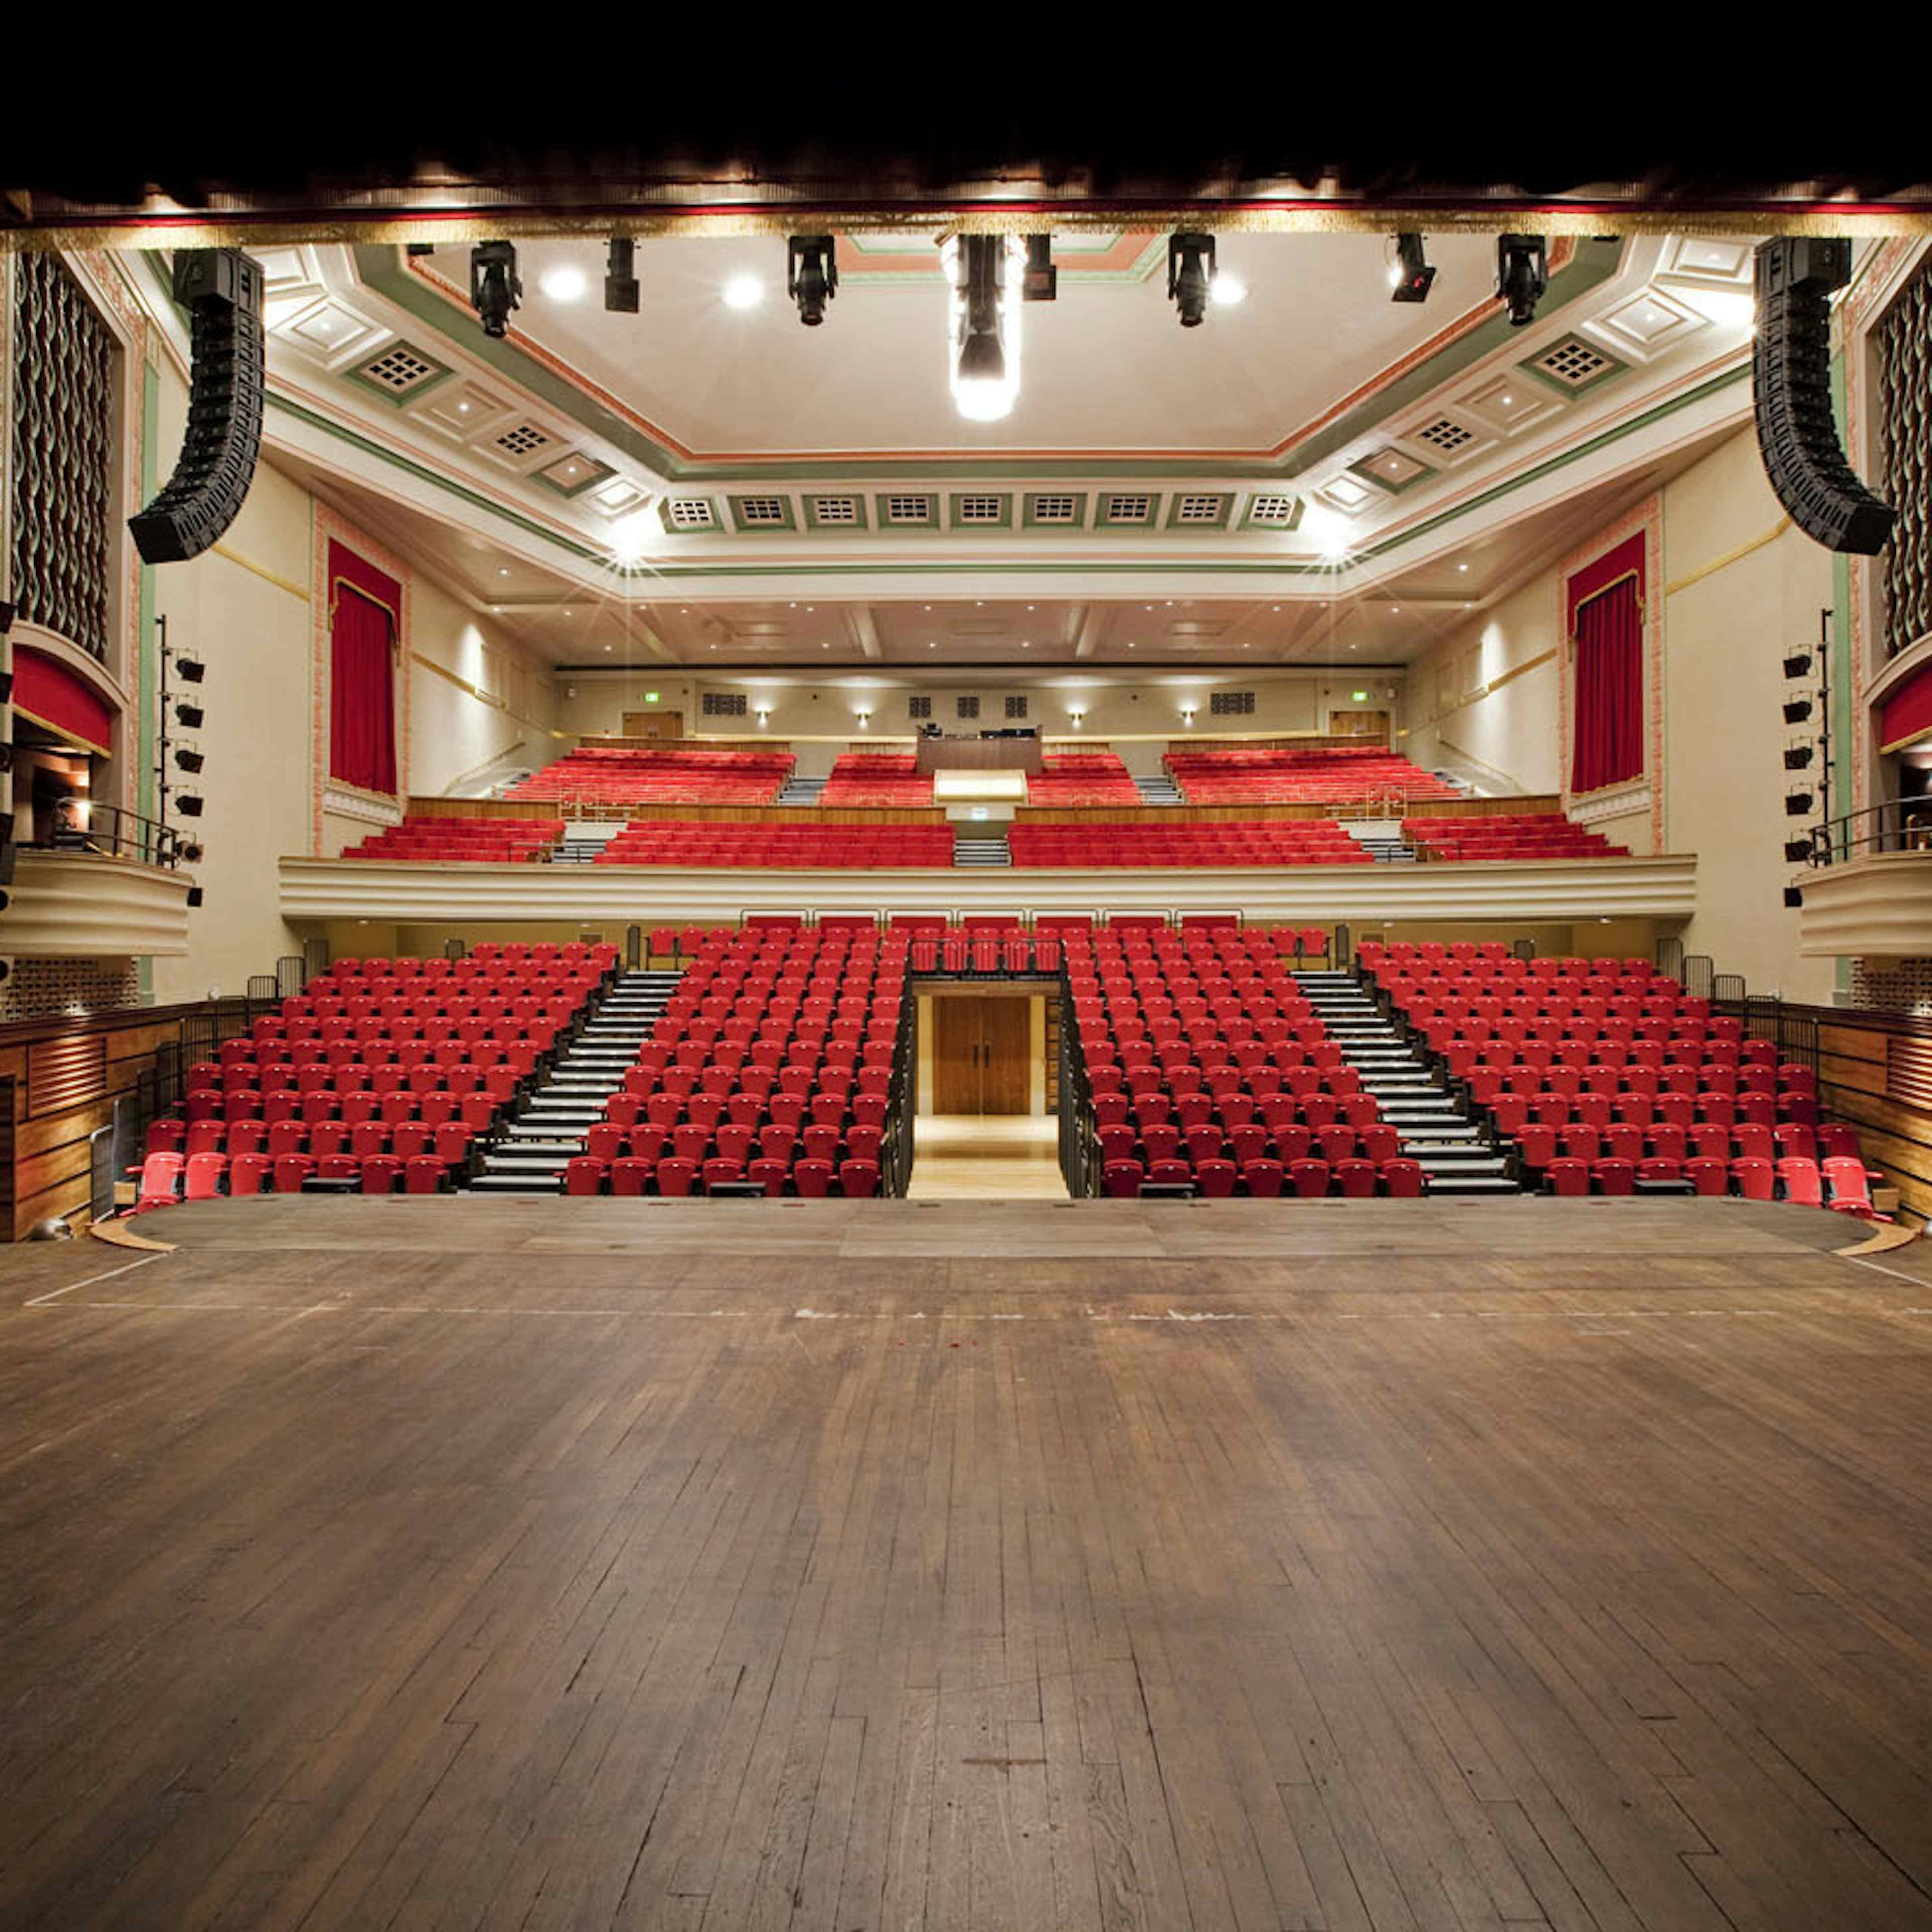 The People's Palace - Queen Mary Venues - The Great Hall Theatre image 3